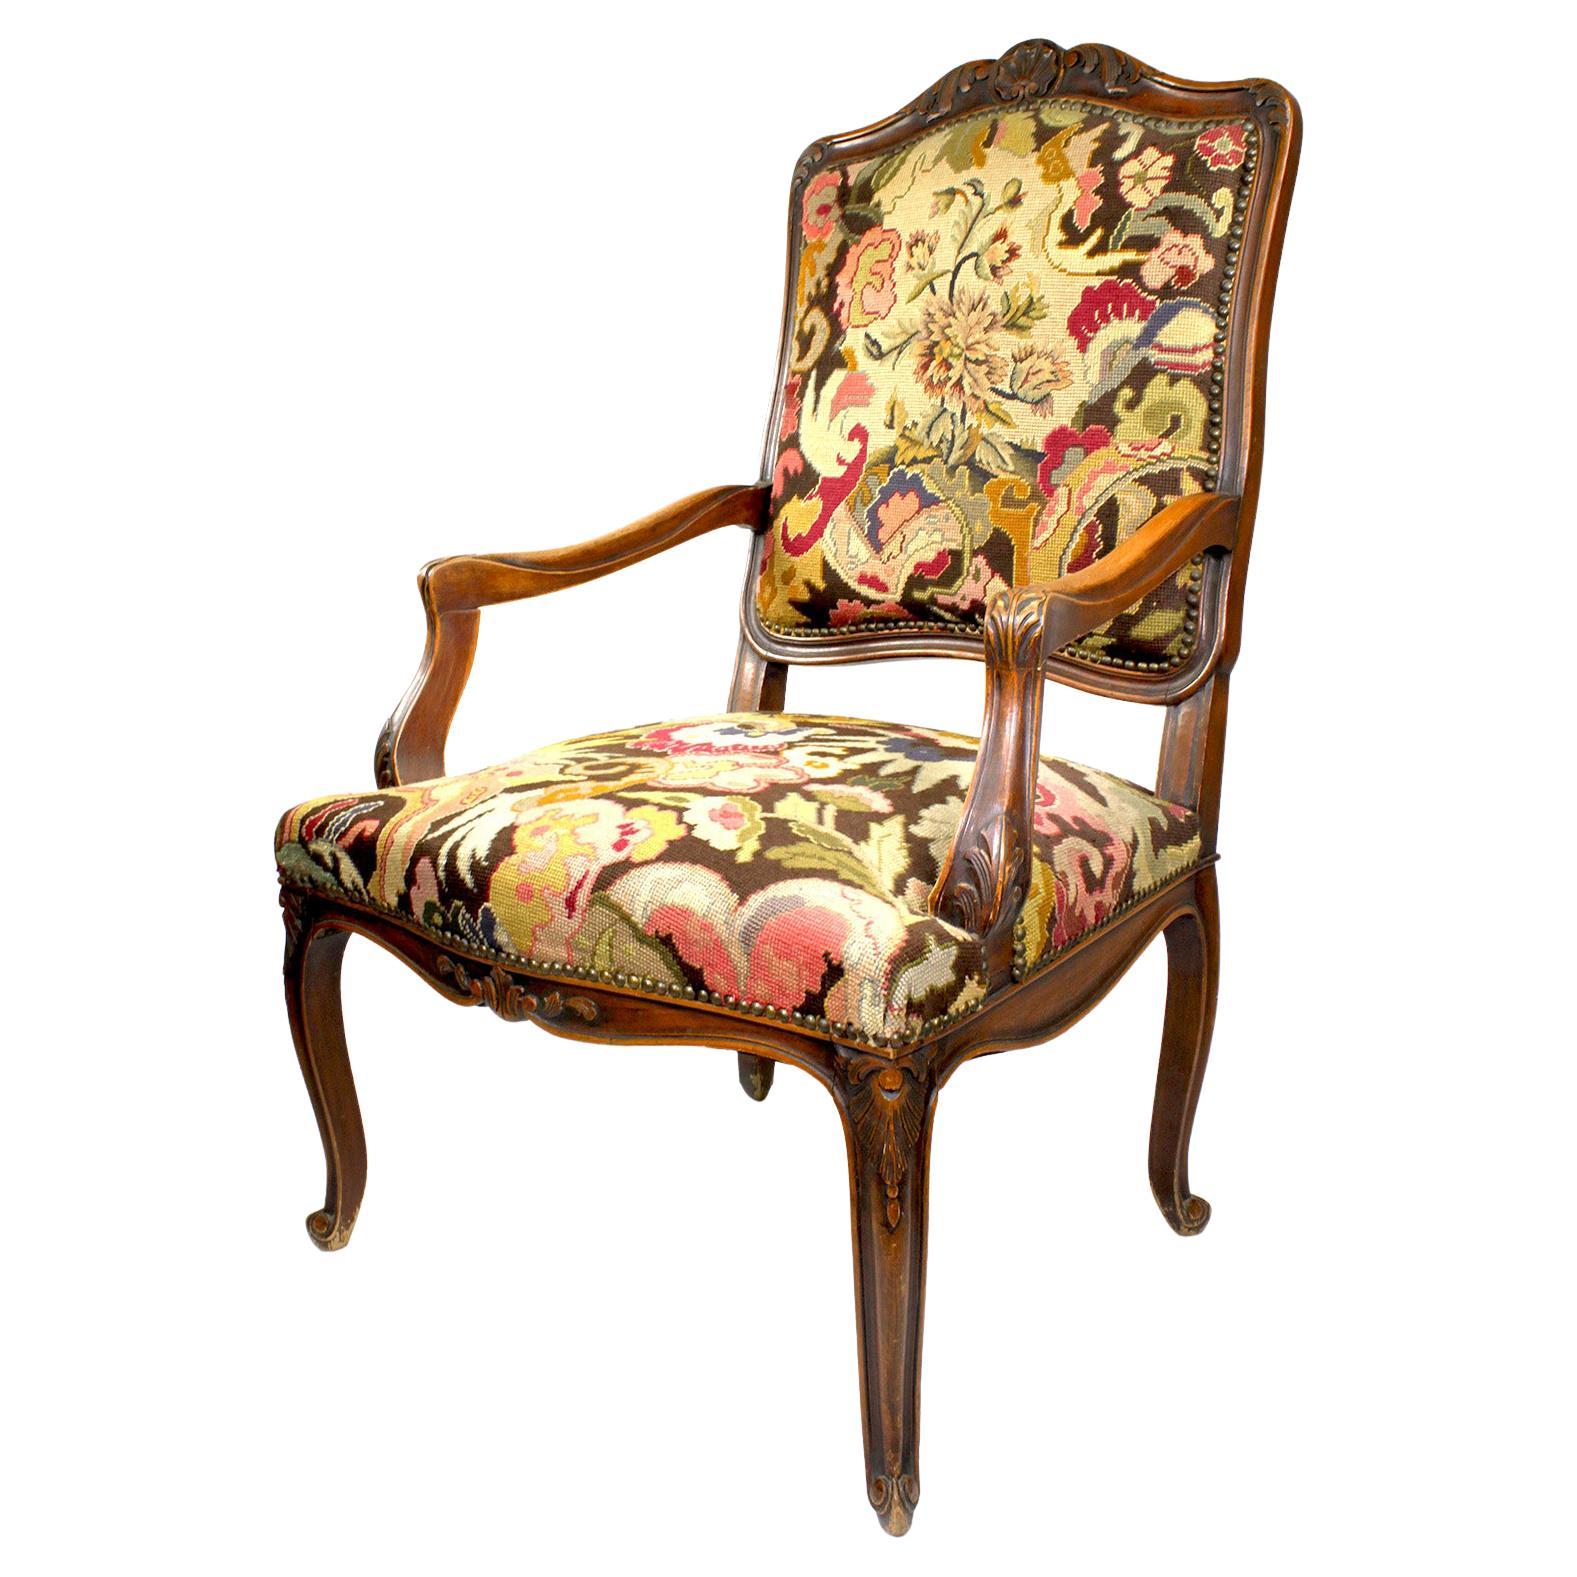 Fine Country French Louis XV Style Carved Walnut and Needlepoint Armchair